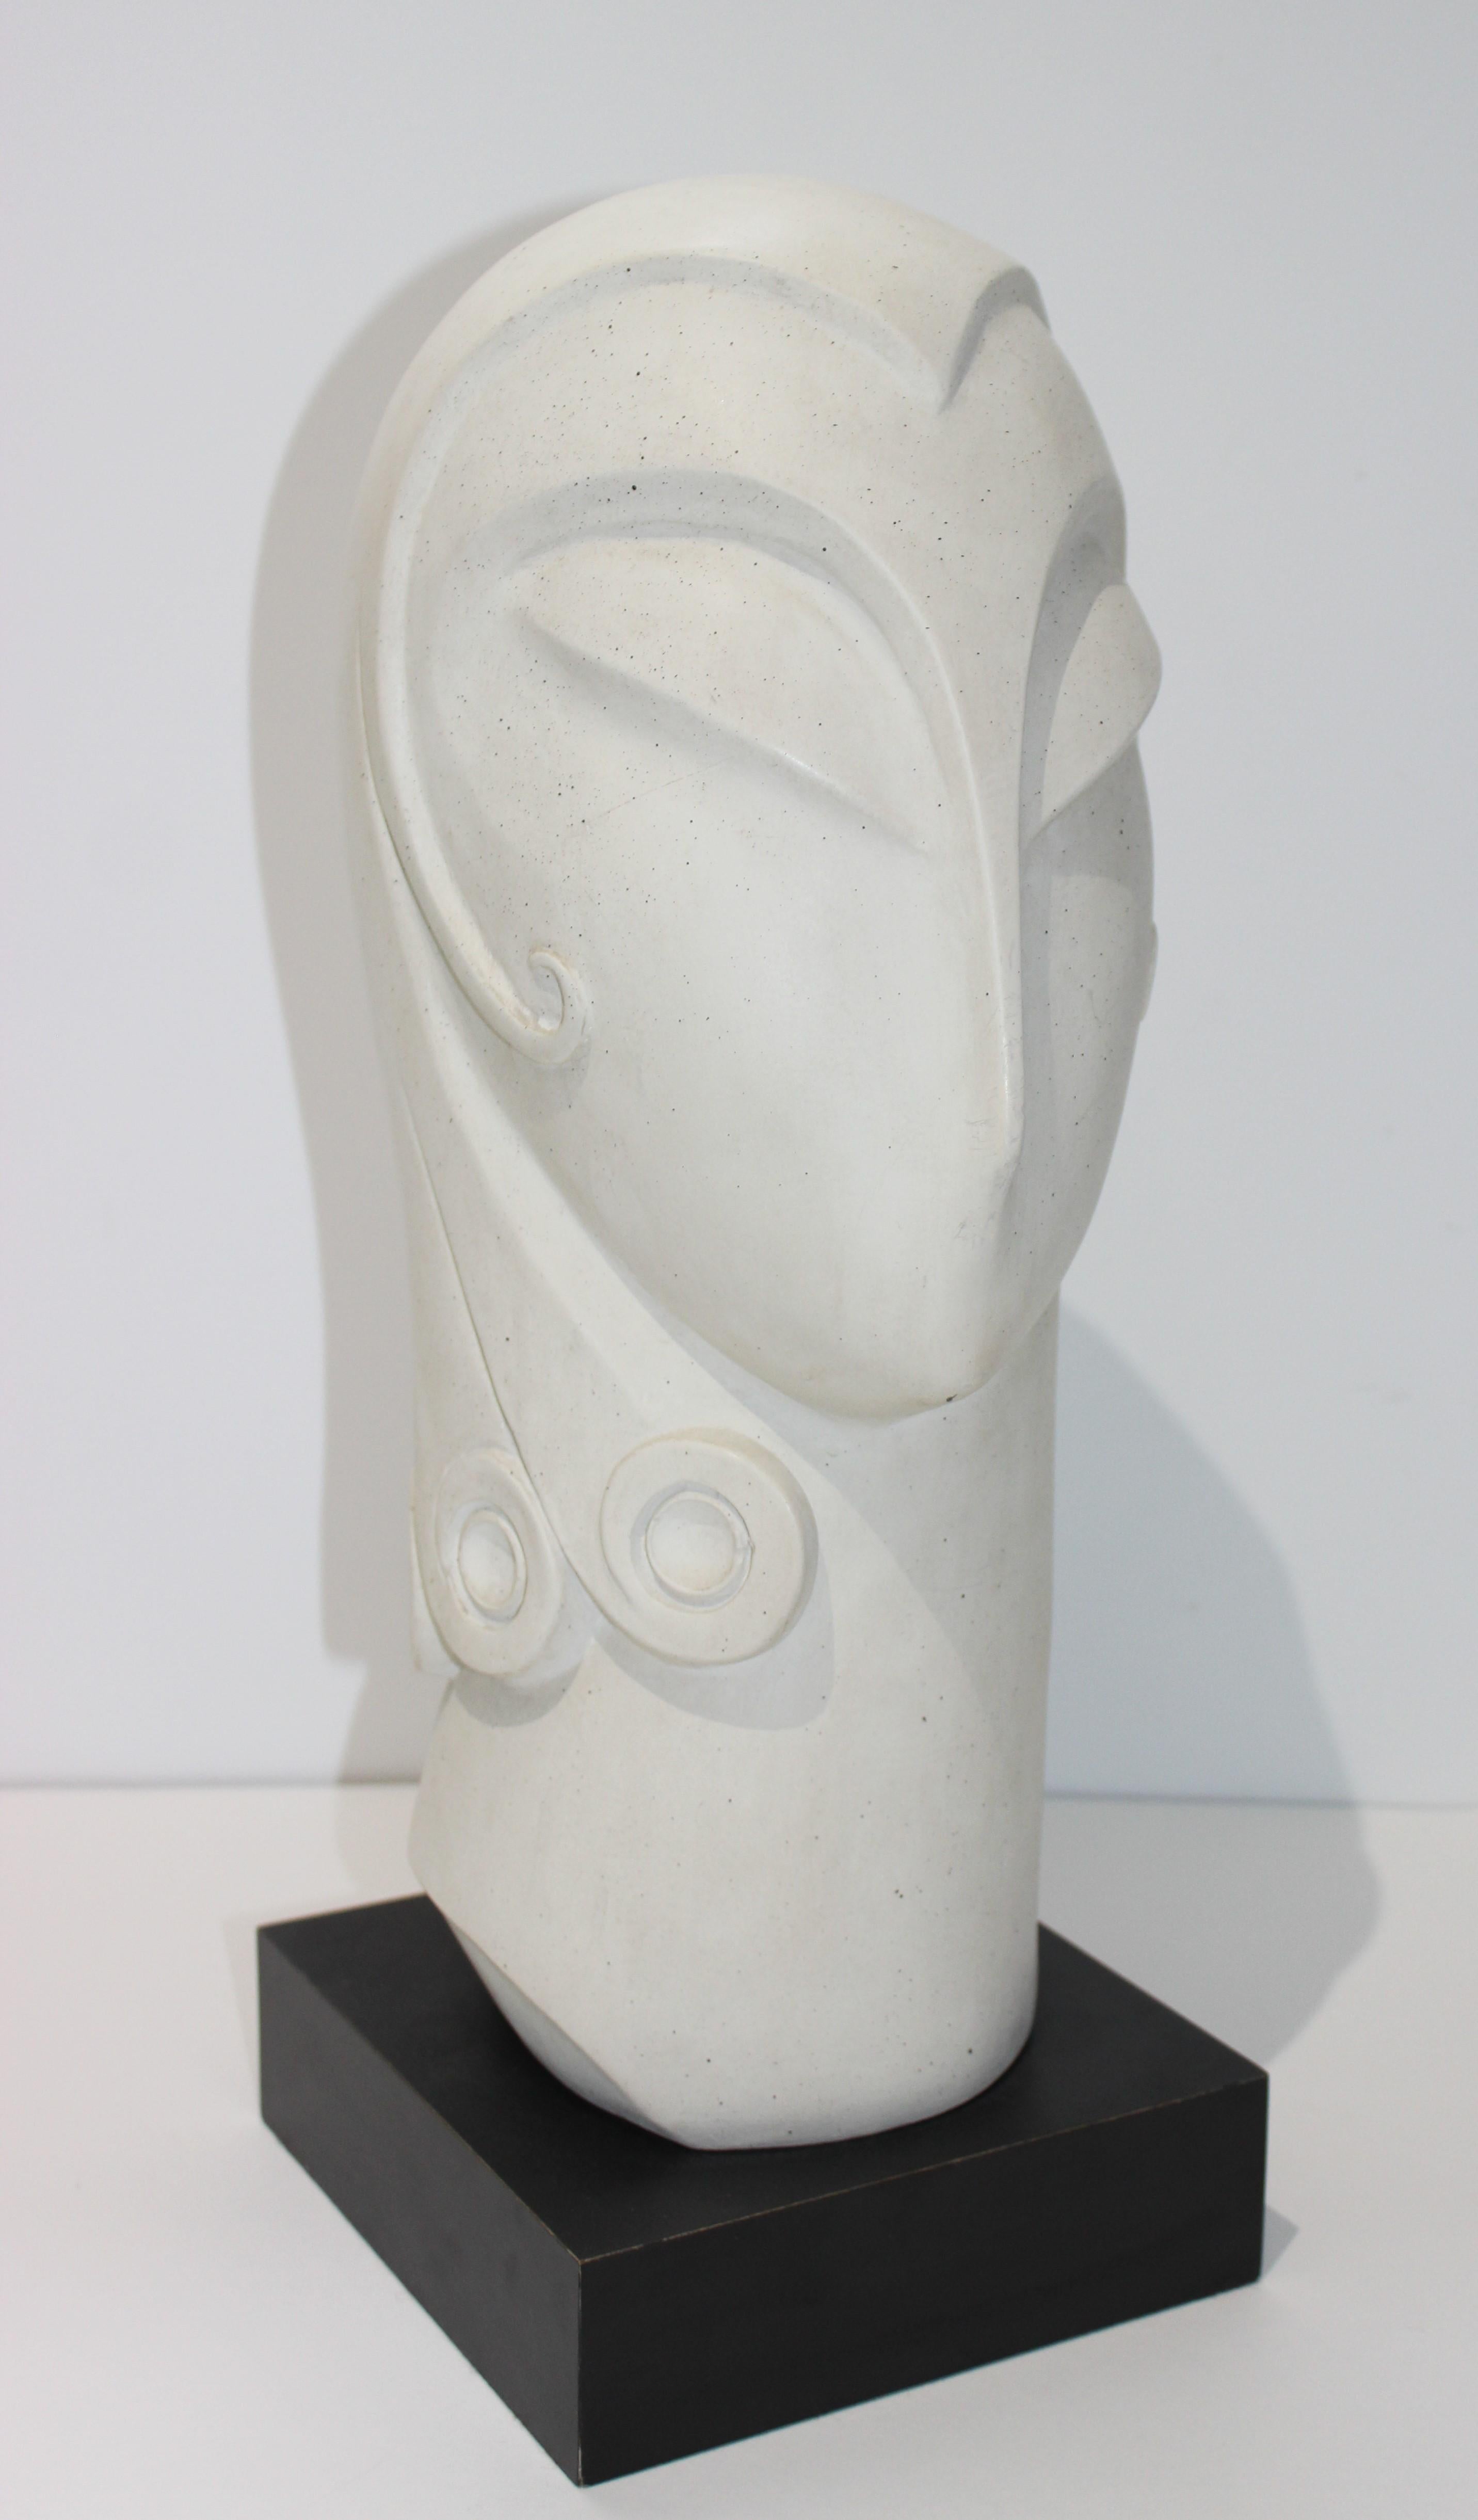 This large scale Austin Productions Art Deco style sculpture of a womans head showing off her stylish hairdo dates to 1985 and definitely has overtones of the exotic Asian influence of the 1920s and 1930s.

Note: The sculptors name was Fisher, but